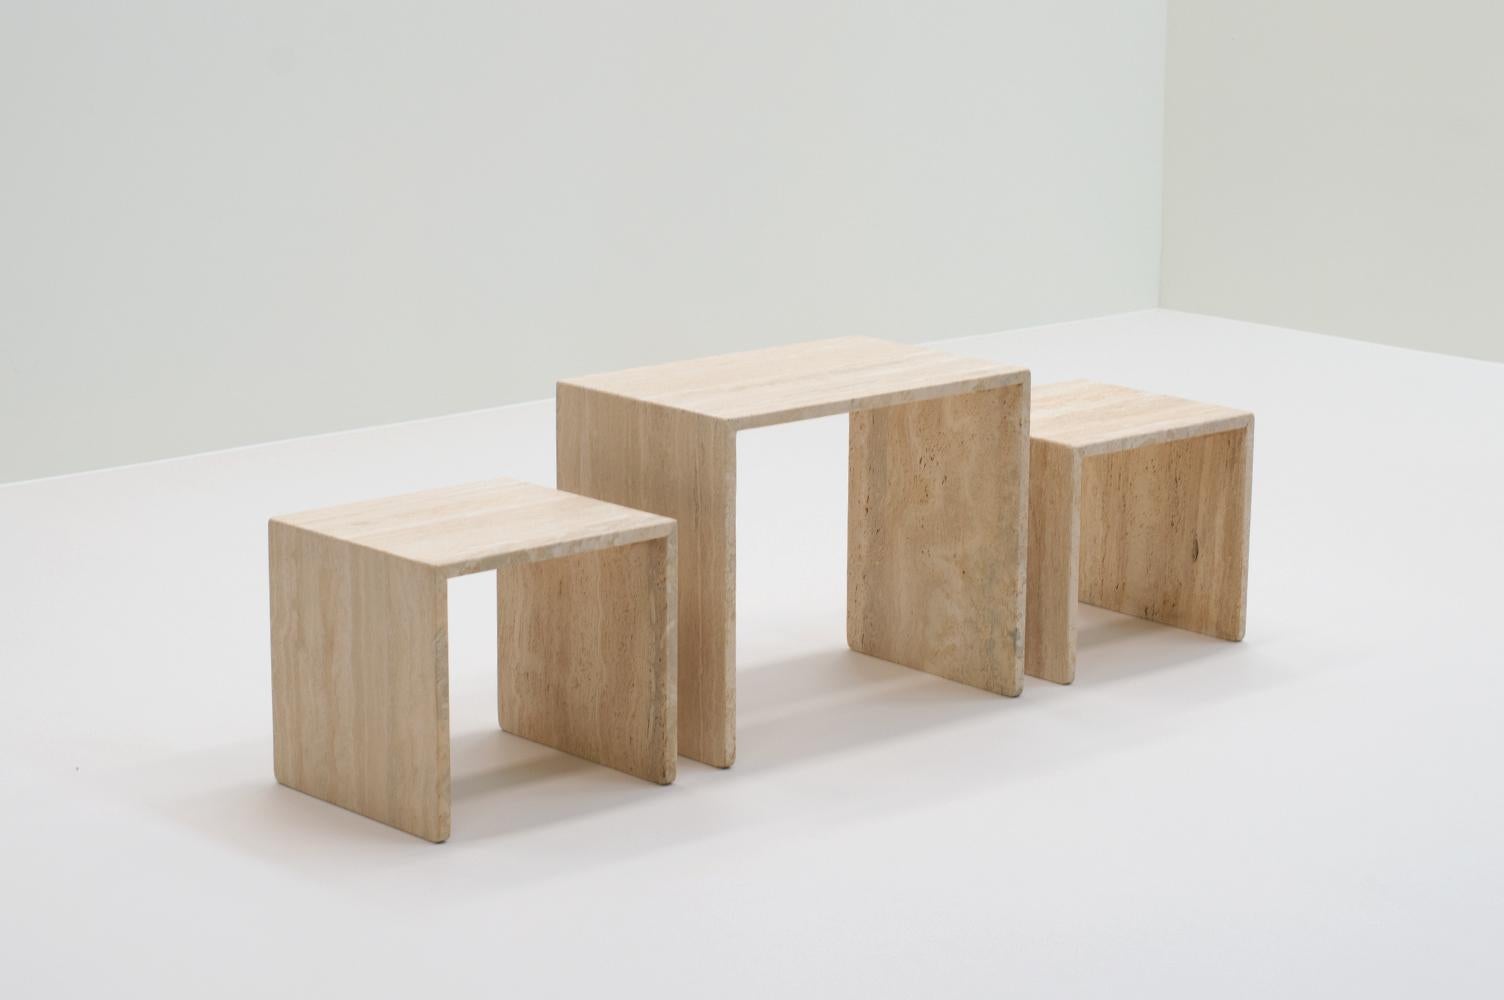 Set of 3 Italian travertine side tables 70s. There are countless ways to place them. Use as coffee tables or side tables, together or separate. In very good vintage condition. 

Measurements Large:
– Height: 46.5 cm
– Width: 55 cm
– Depth: 35